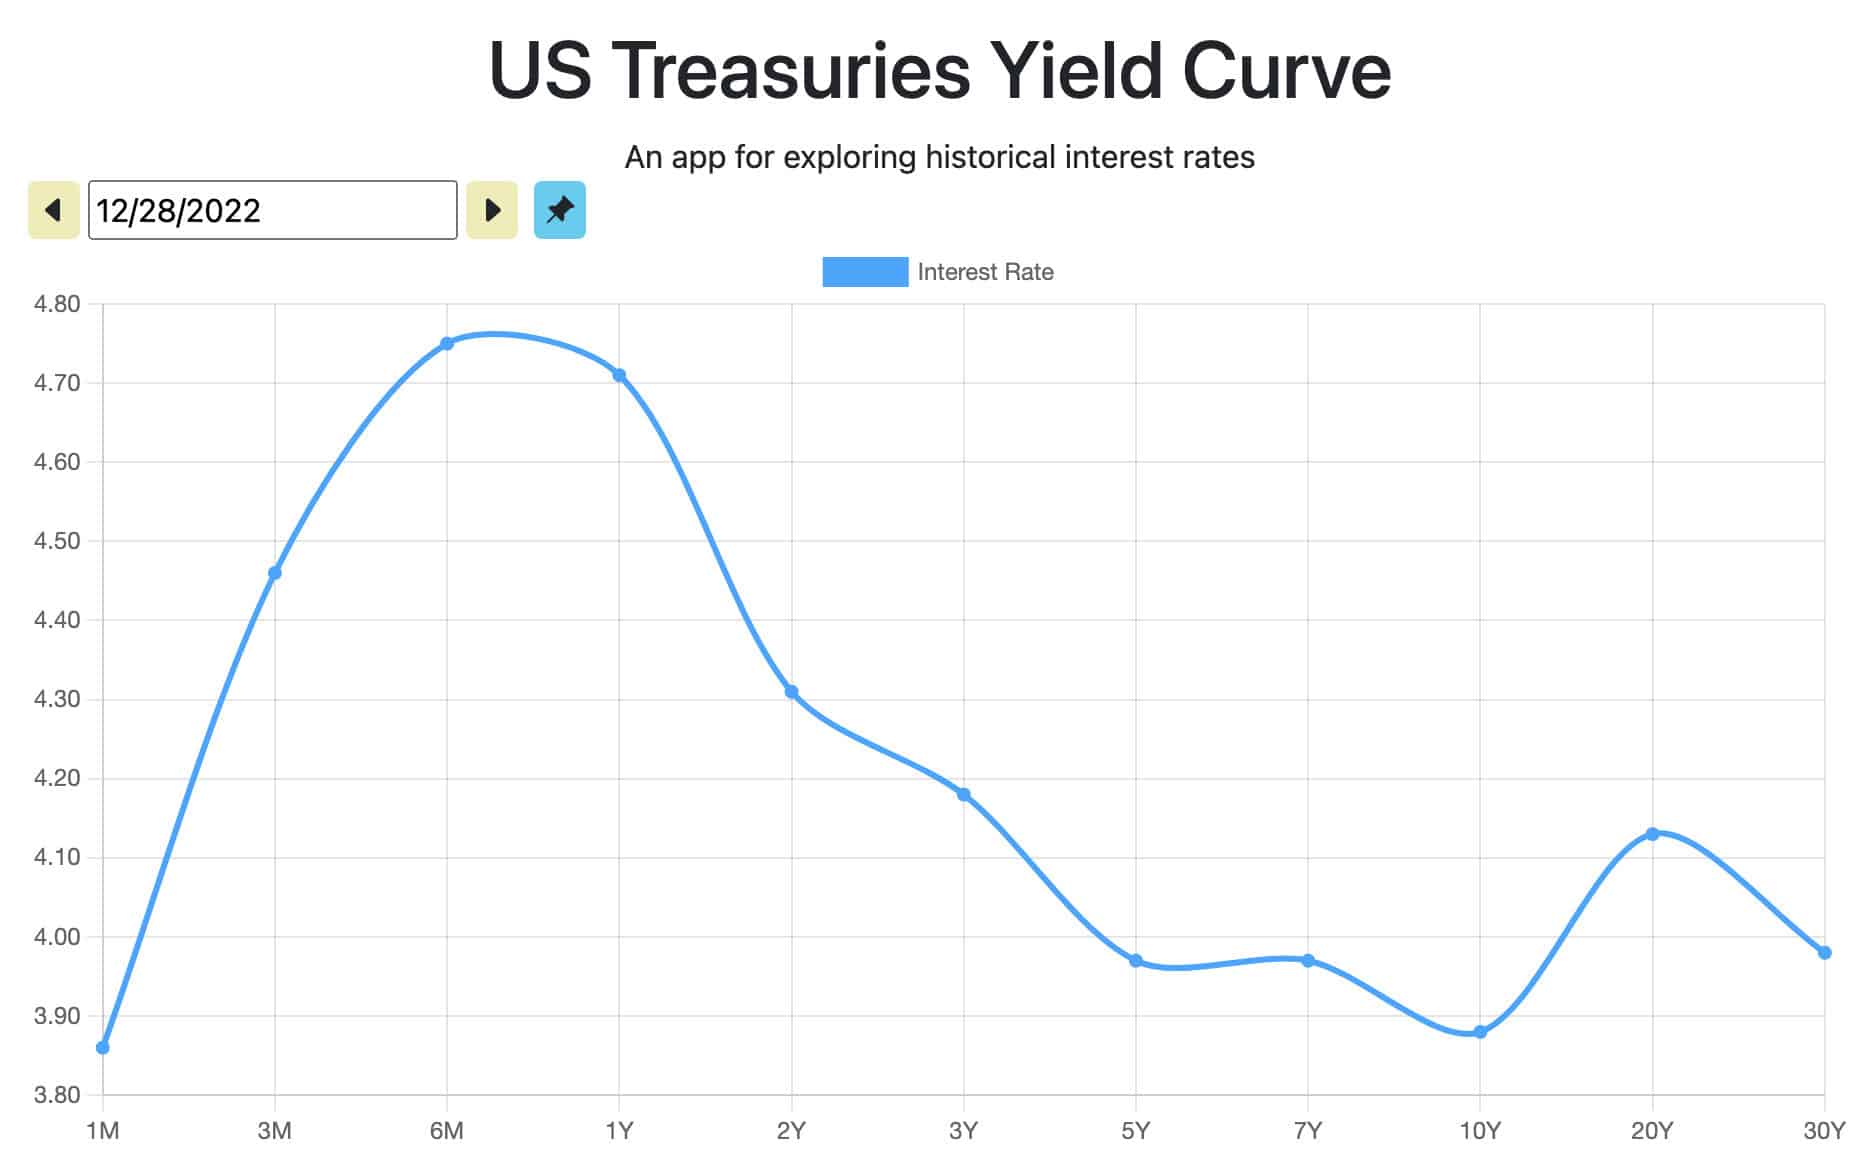 US Treasury Yield Curve - 4 Things We Learned in 2022